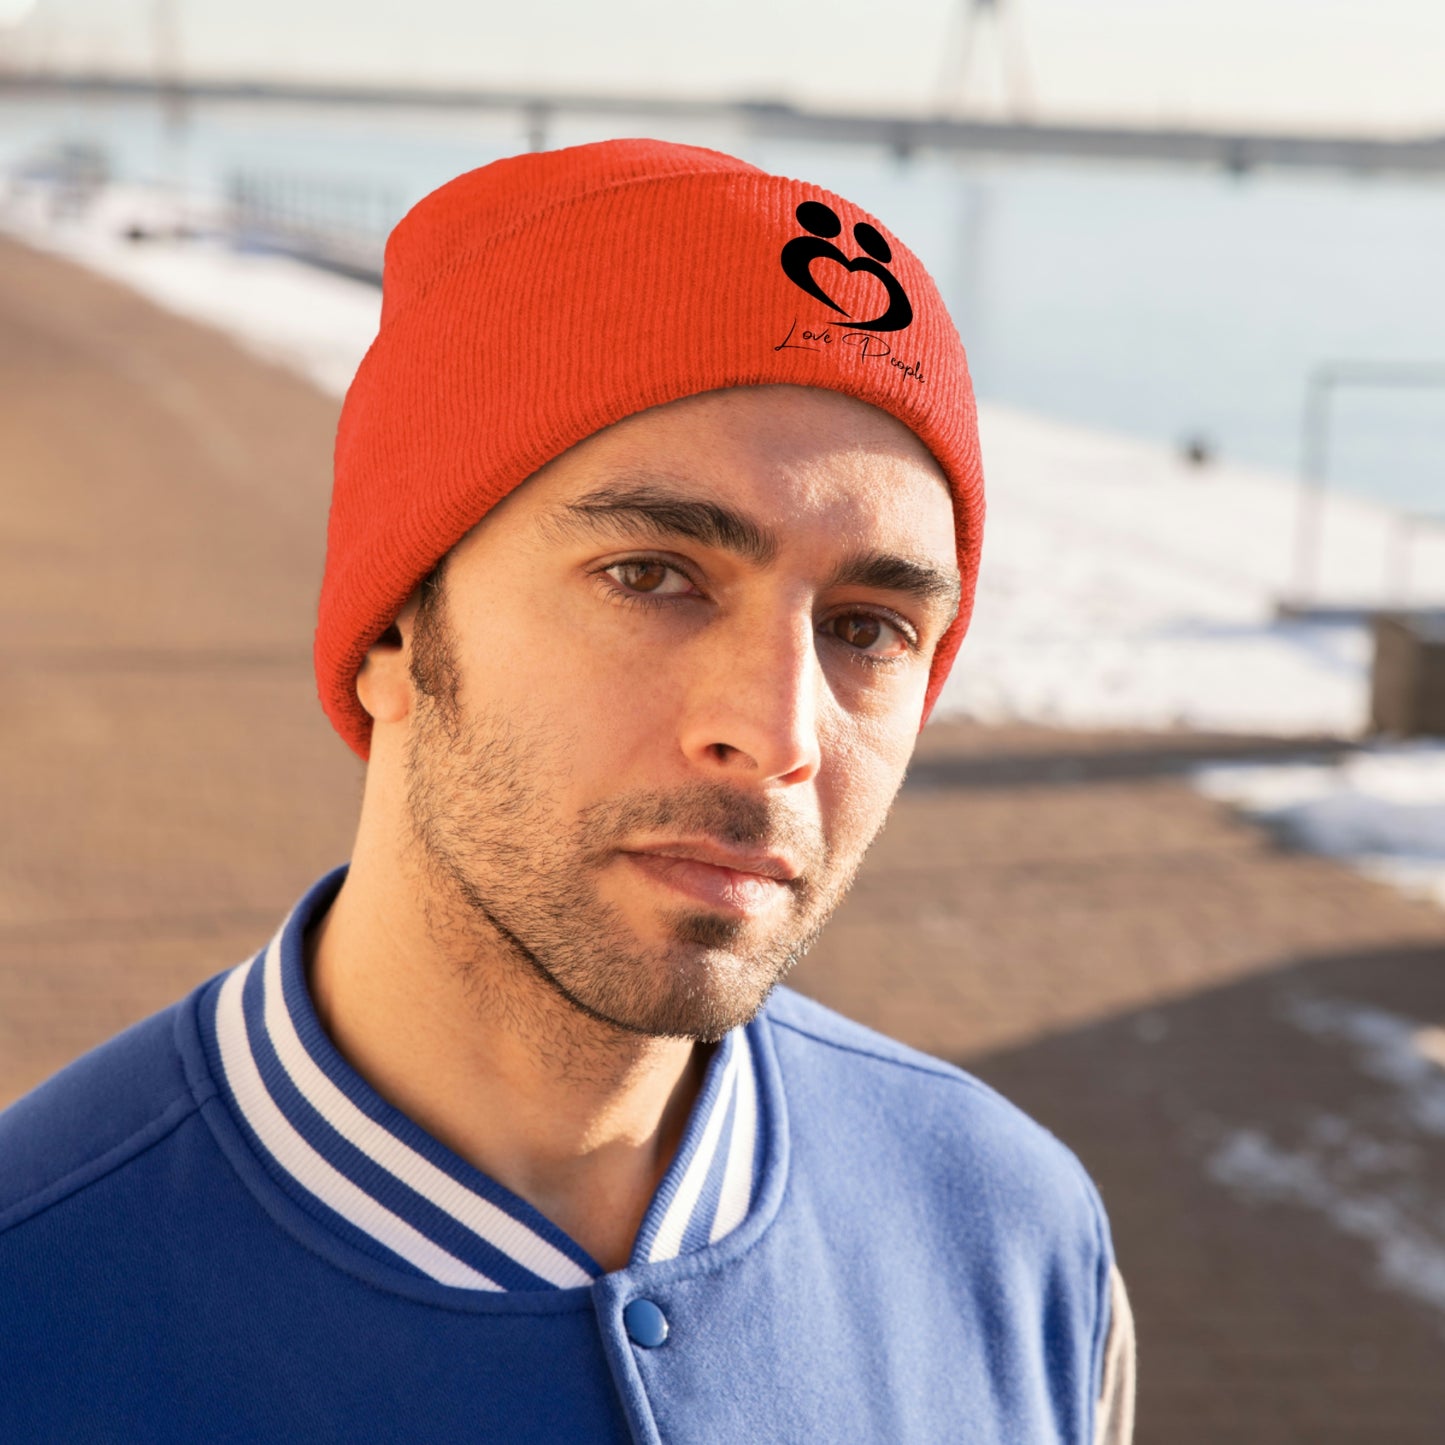 Love People Beanie with Black Logo